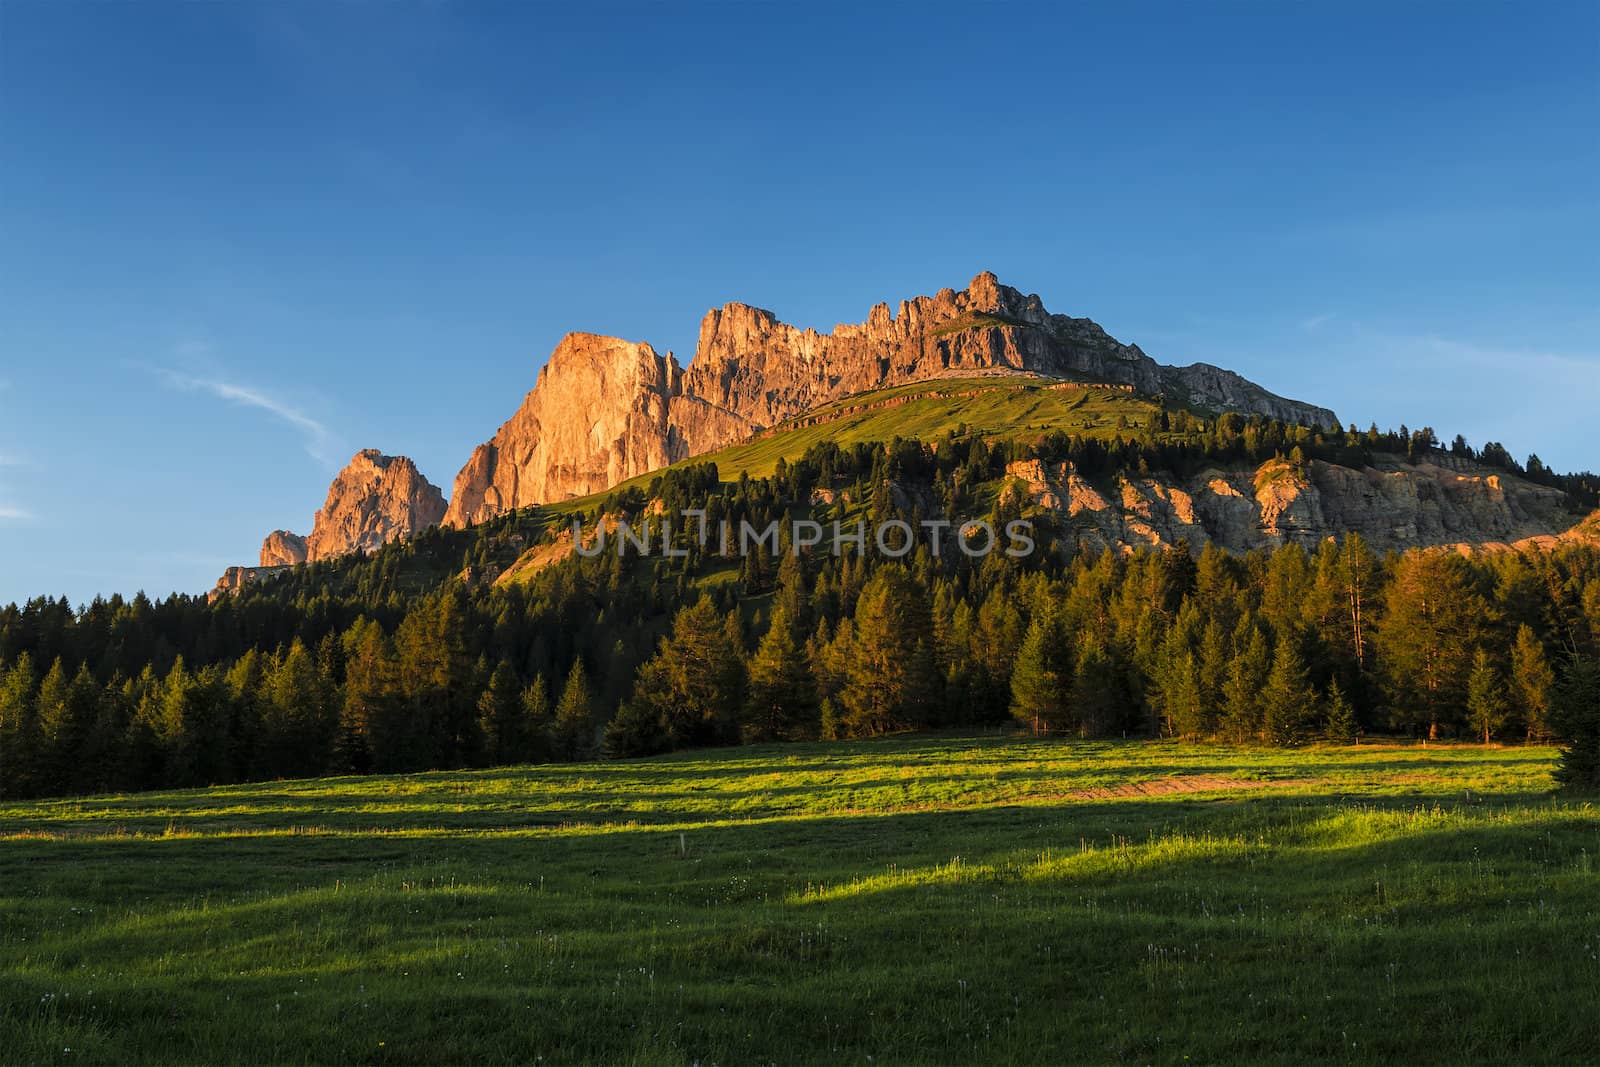 Sunset on the Catinaccio, Dolomites - Italy by Mdc1970